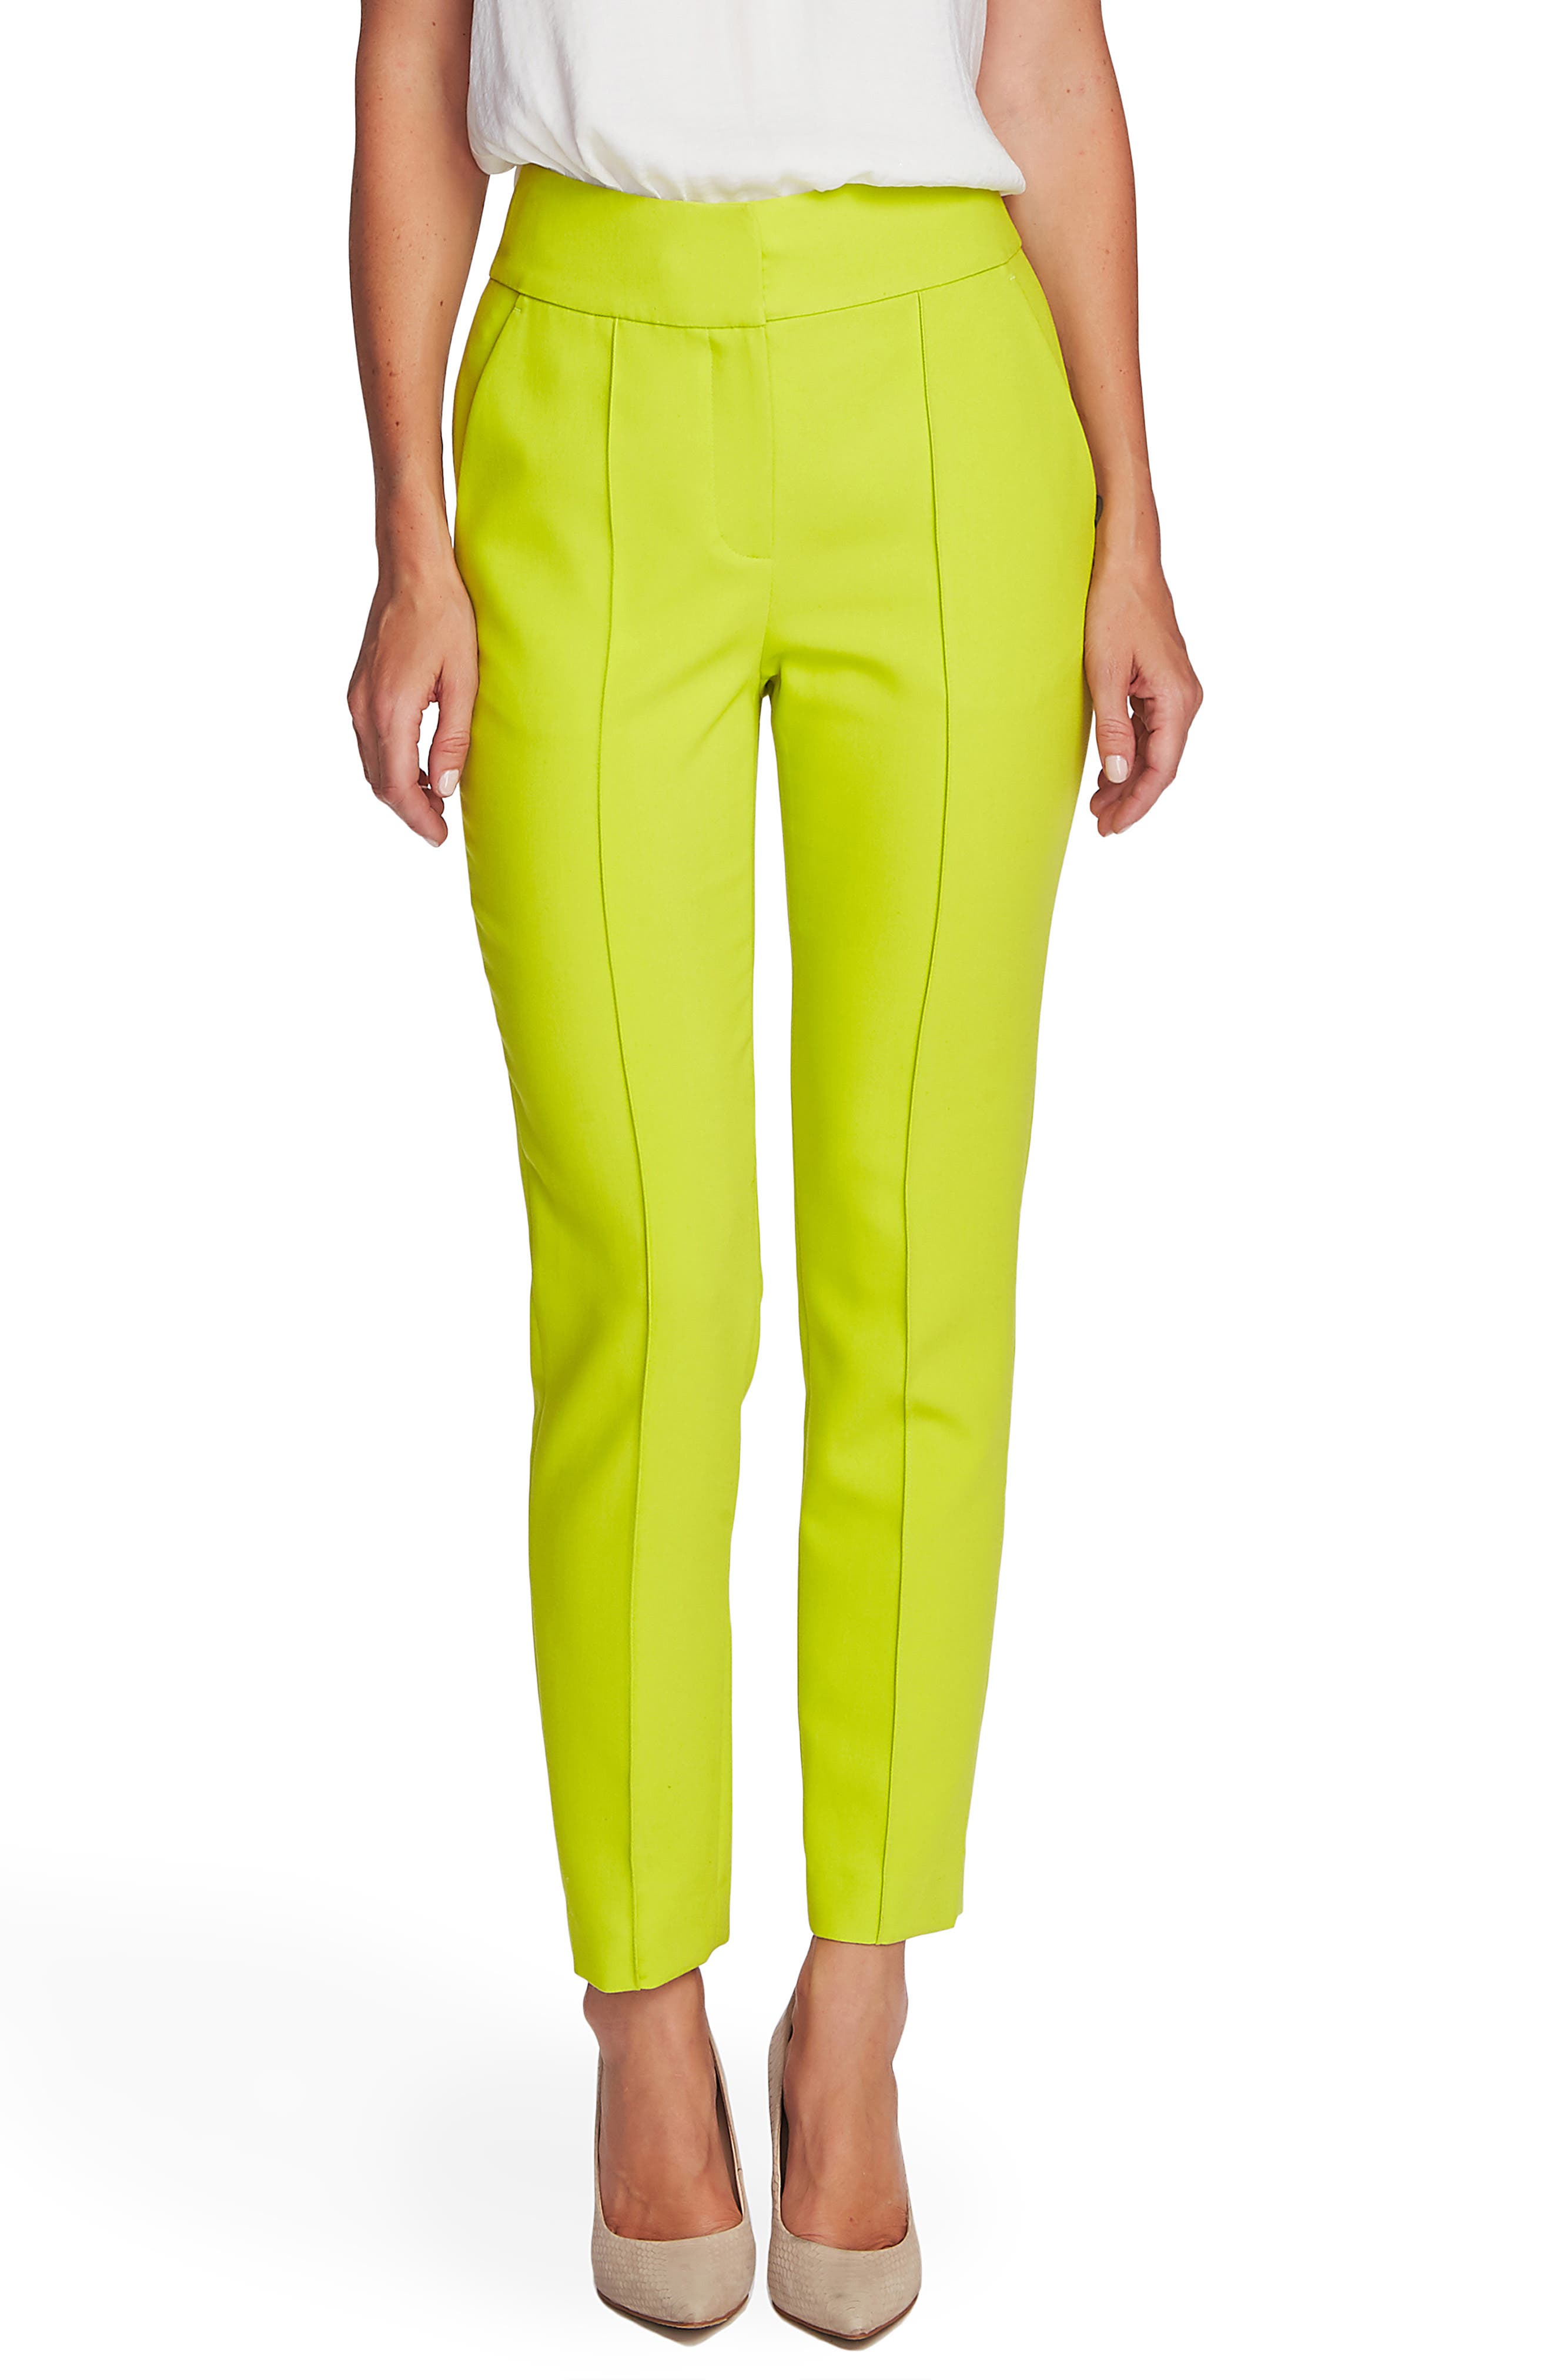 UPC 720655982543 product image for Women's Vince Camuto Center Seam Stretch Crepe Skinny Trousers, Size 4 - Green | upcitemdb.com